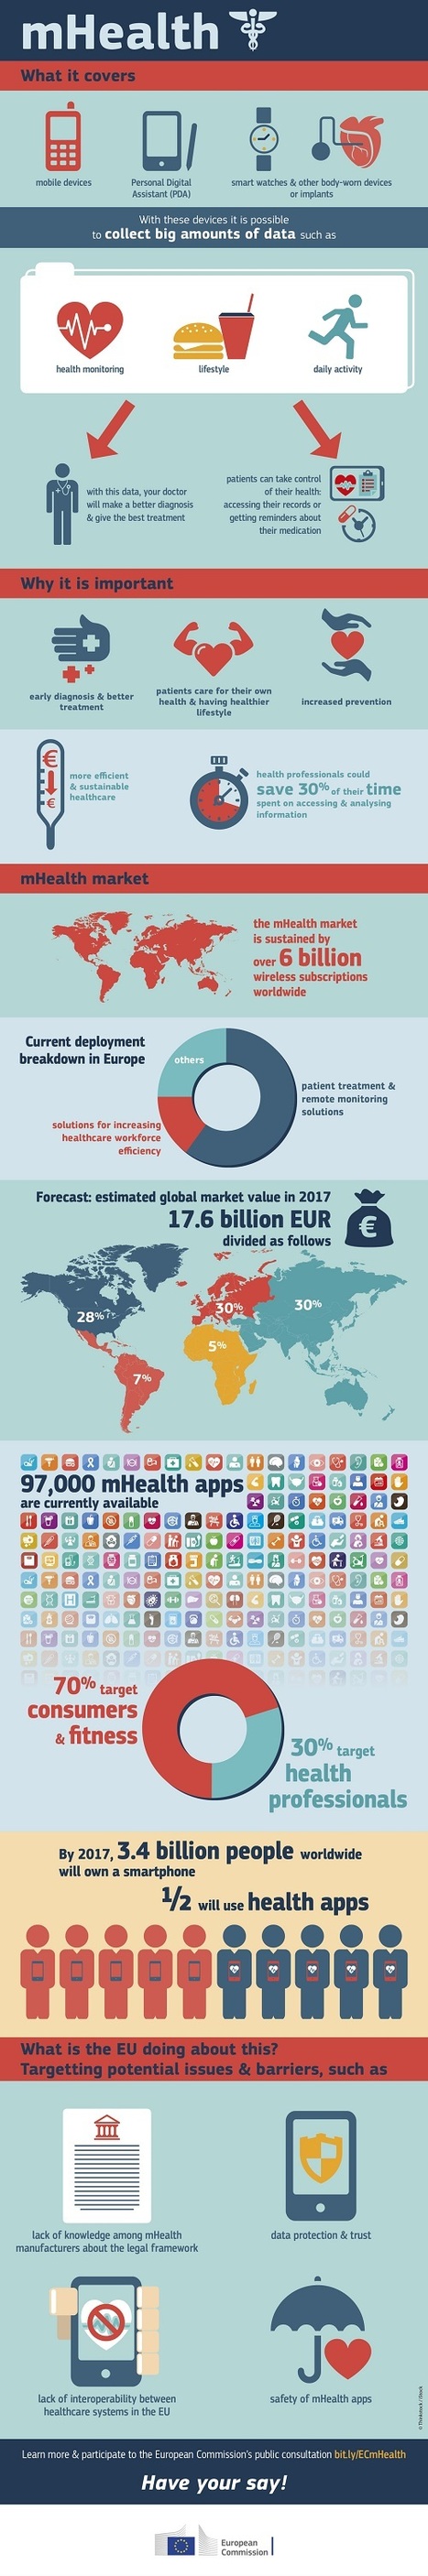 mHealth, what is it? - Infographic | E-Learning-Inclusivo (Mashup) | Scoop.it